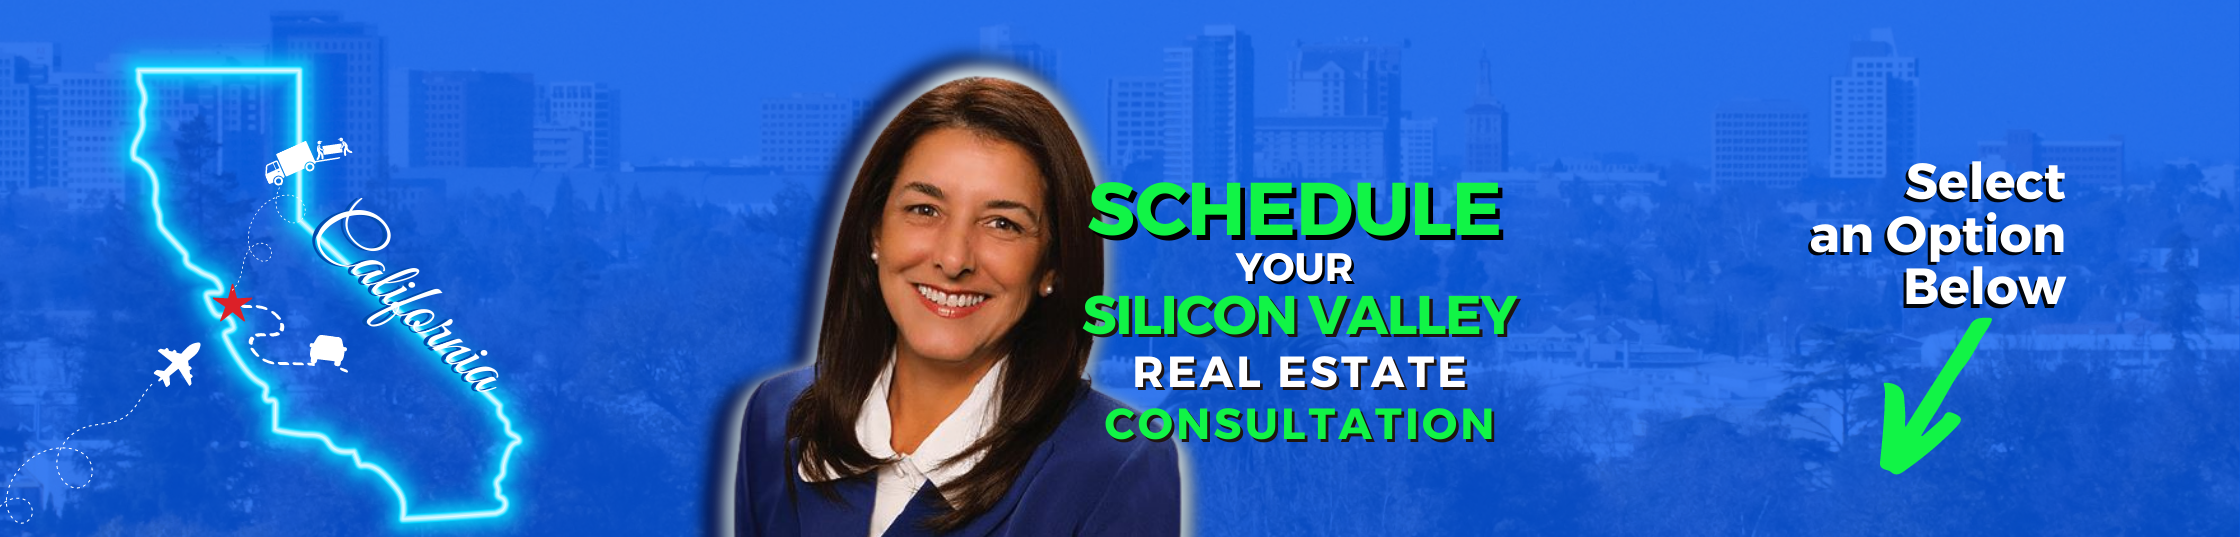 Schedule Your Silicon Valley Real Estate Consultation